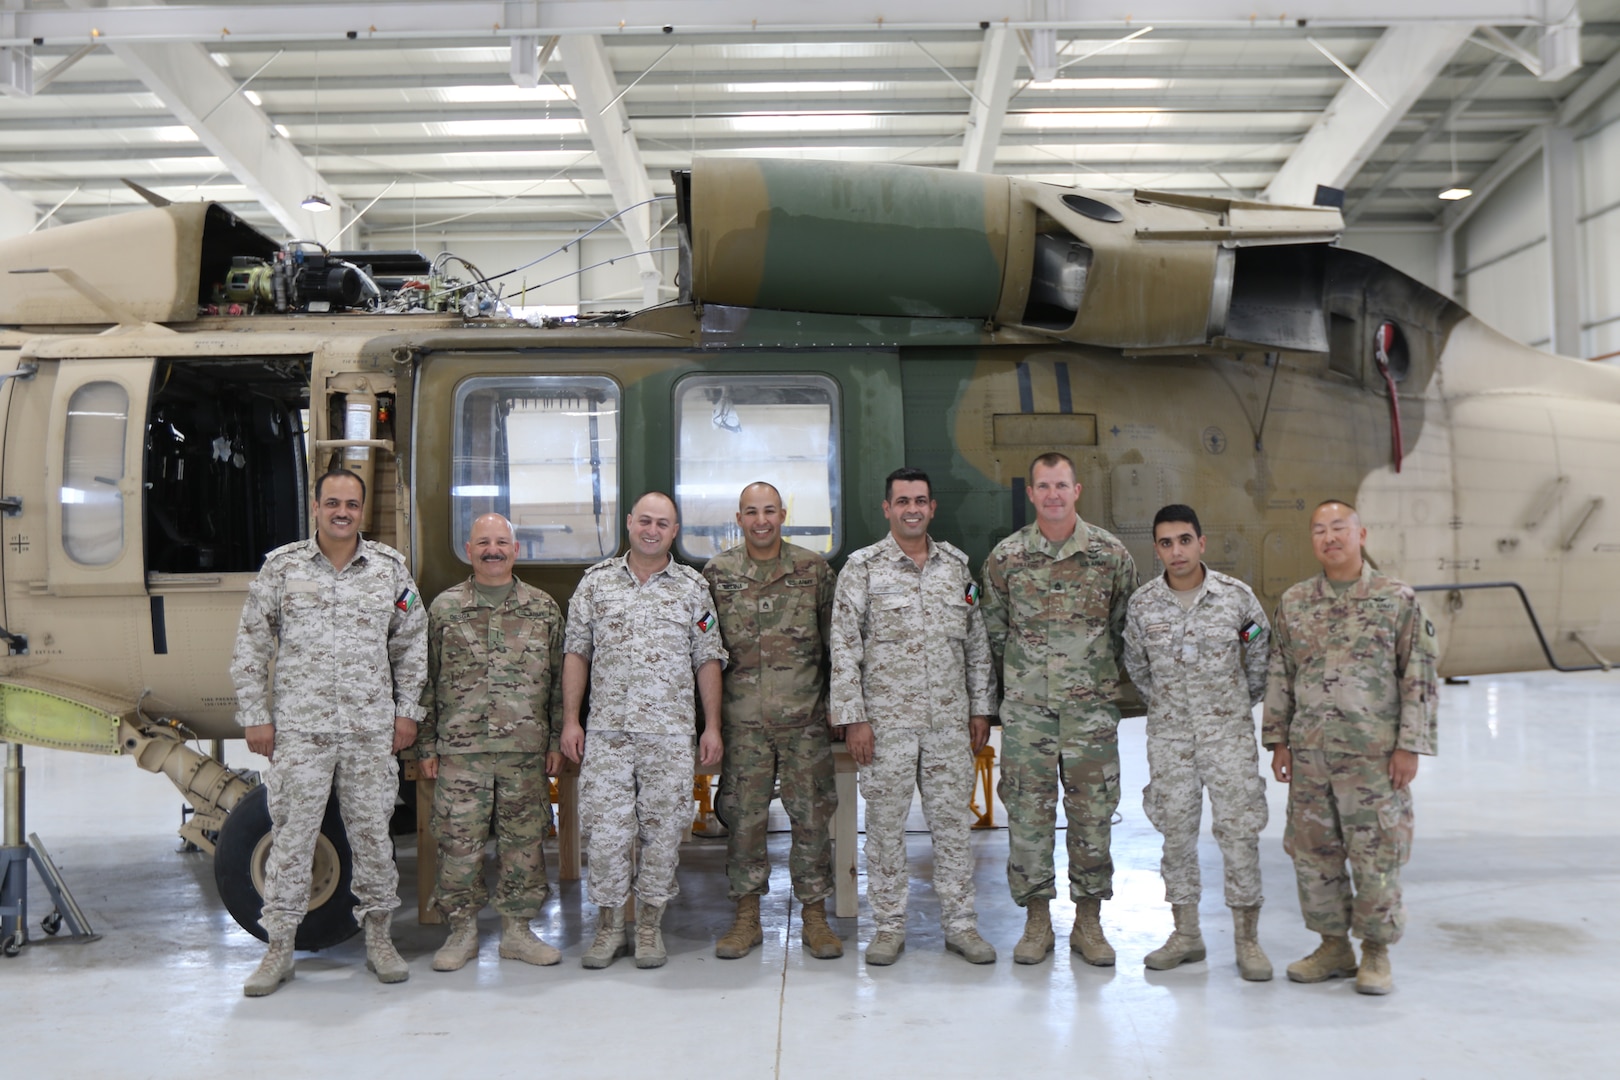 U. S. Army Soldiers and Royal Jordanian Air Force members gather for a photo while conducting an aviation subject matter exchange in Amman, Jordan, June 19, 2019. (U.S. Army National Guard photo by Staff Sgt. Veronica McNabb)